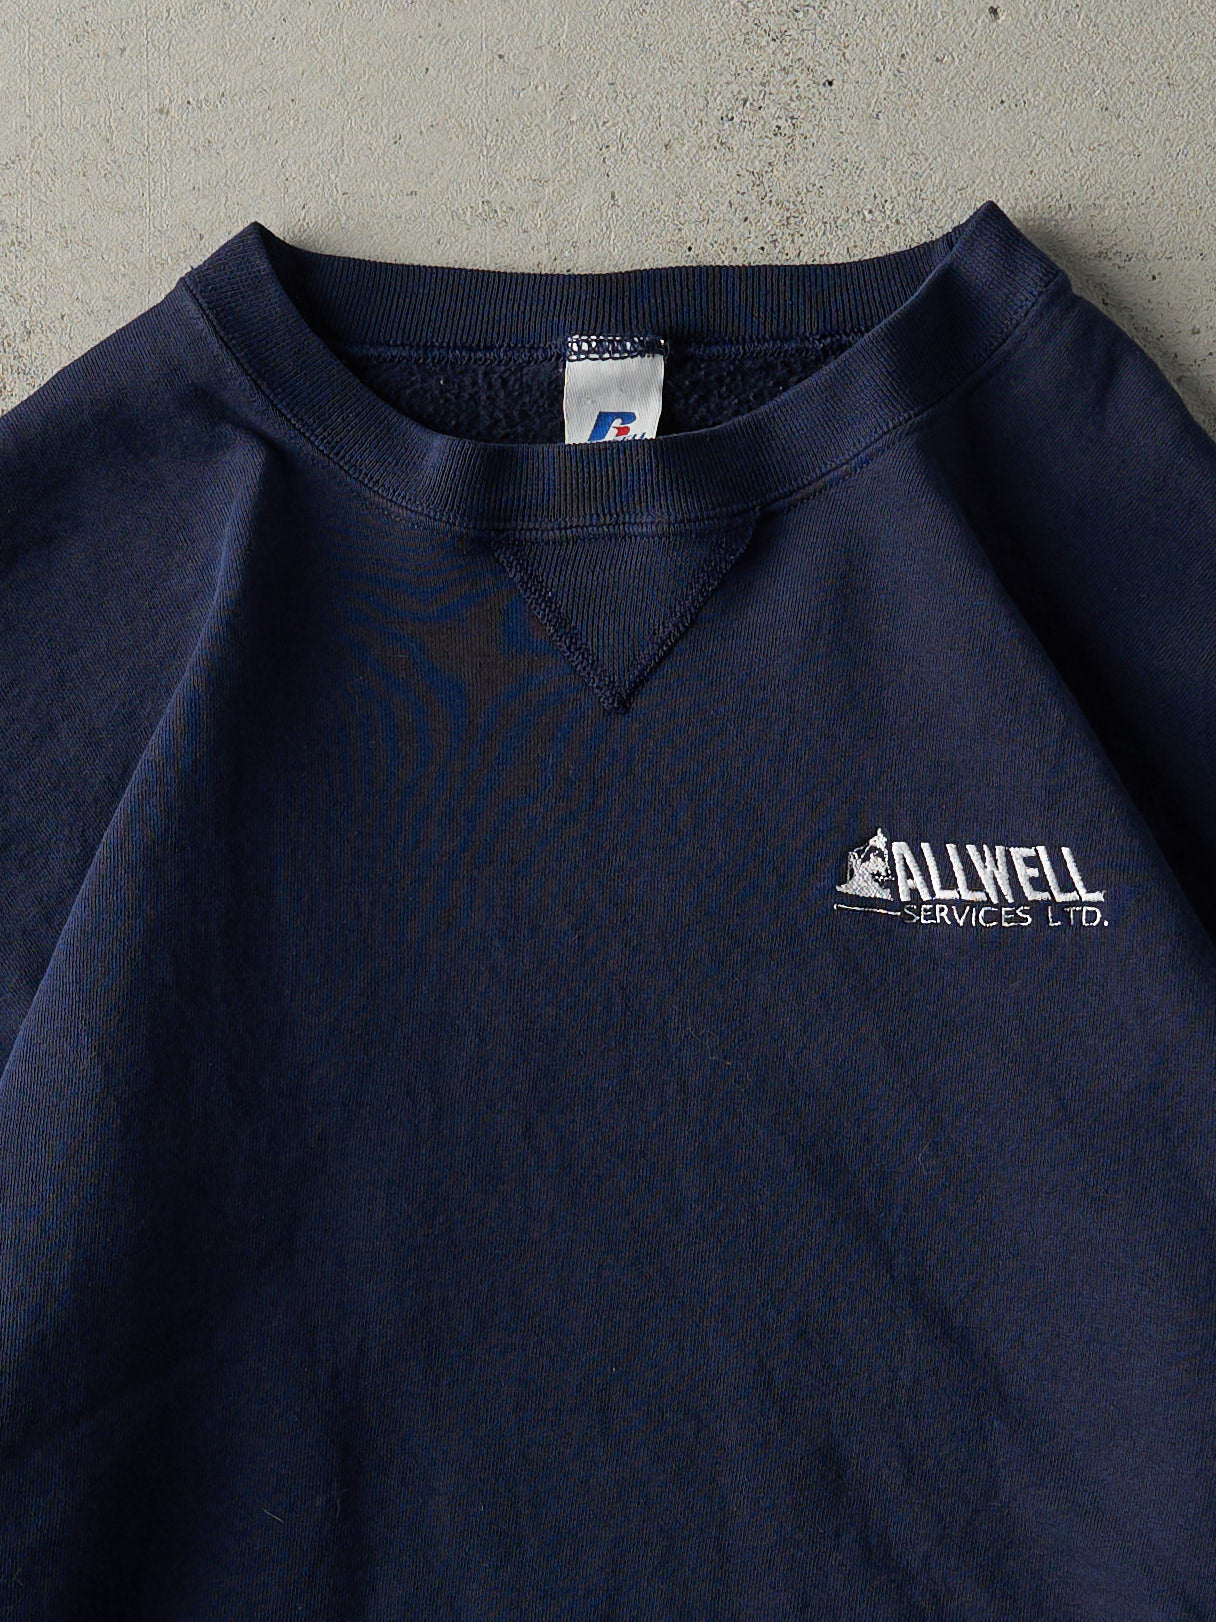 Vintage 90s Navy Blue Embroidered Logo Russell Athletic Crewneck (L)